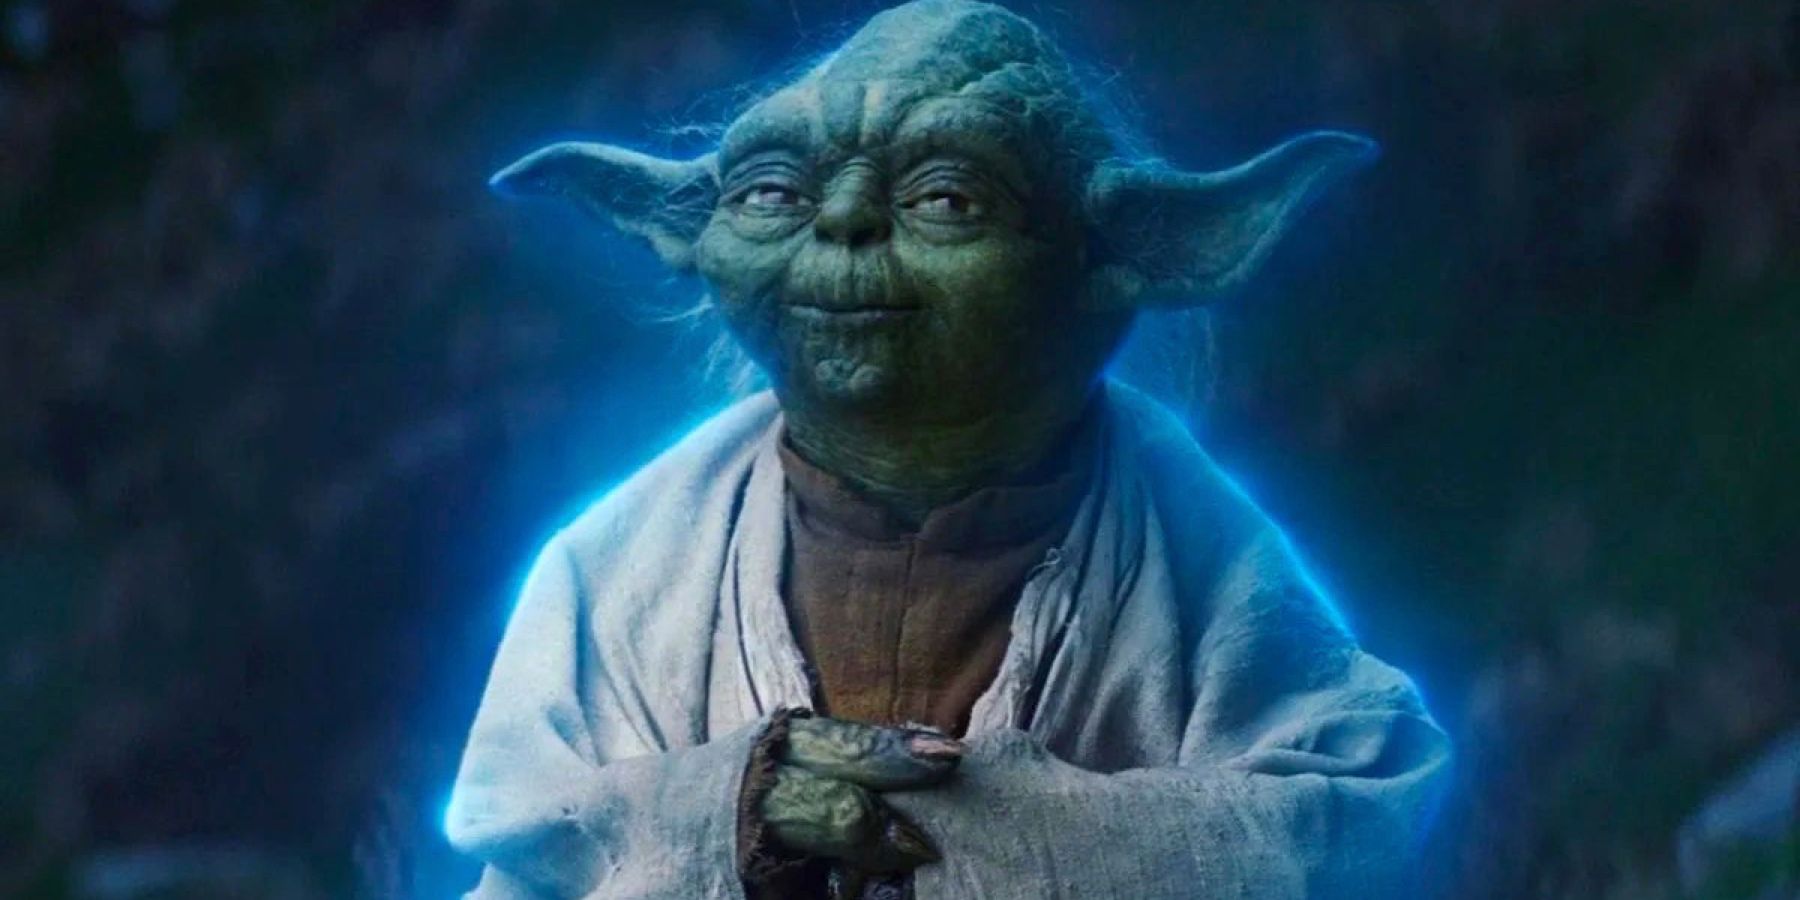 The Force Ghost of Jedi Master Yoda smiles in Star Wars: Episode VIII - The Last Jedi.